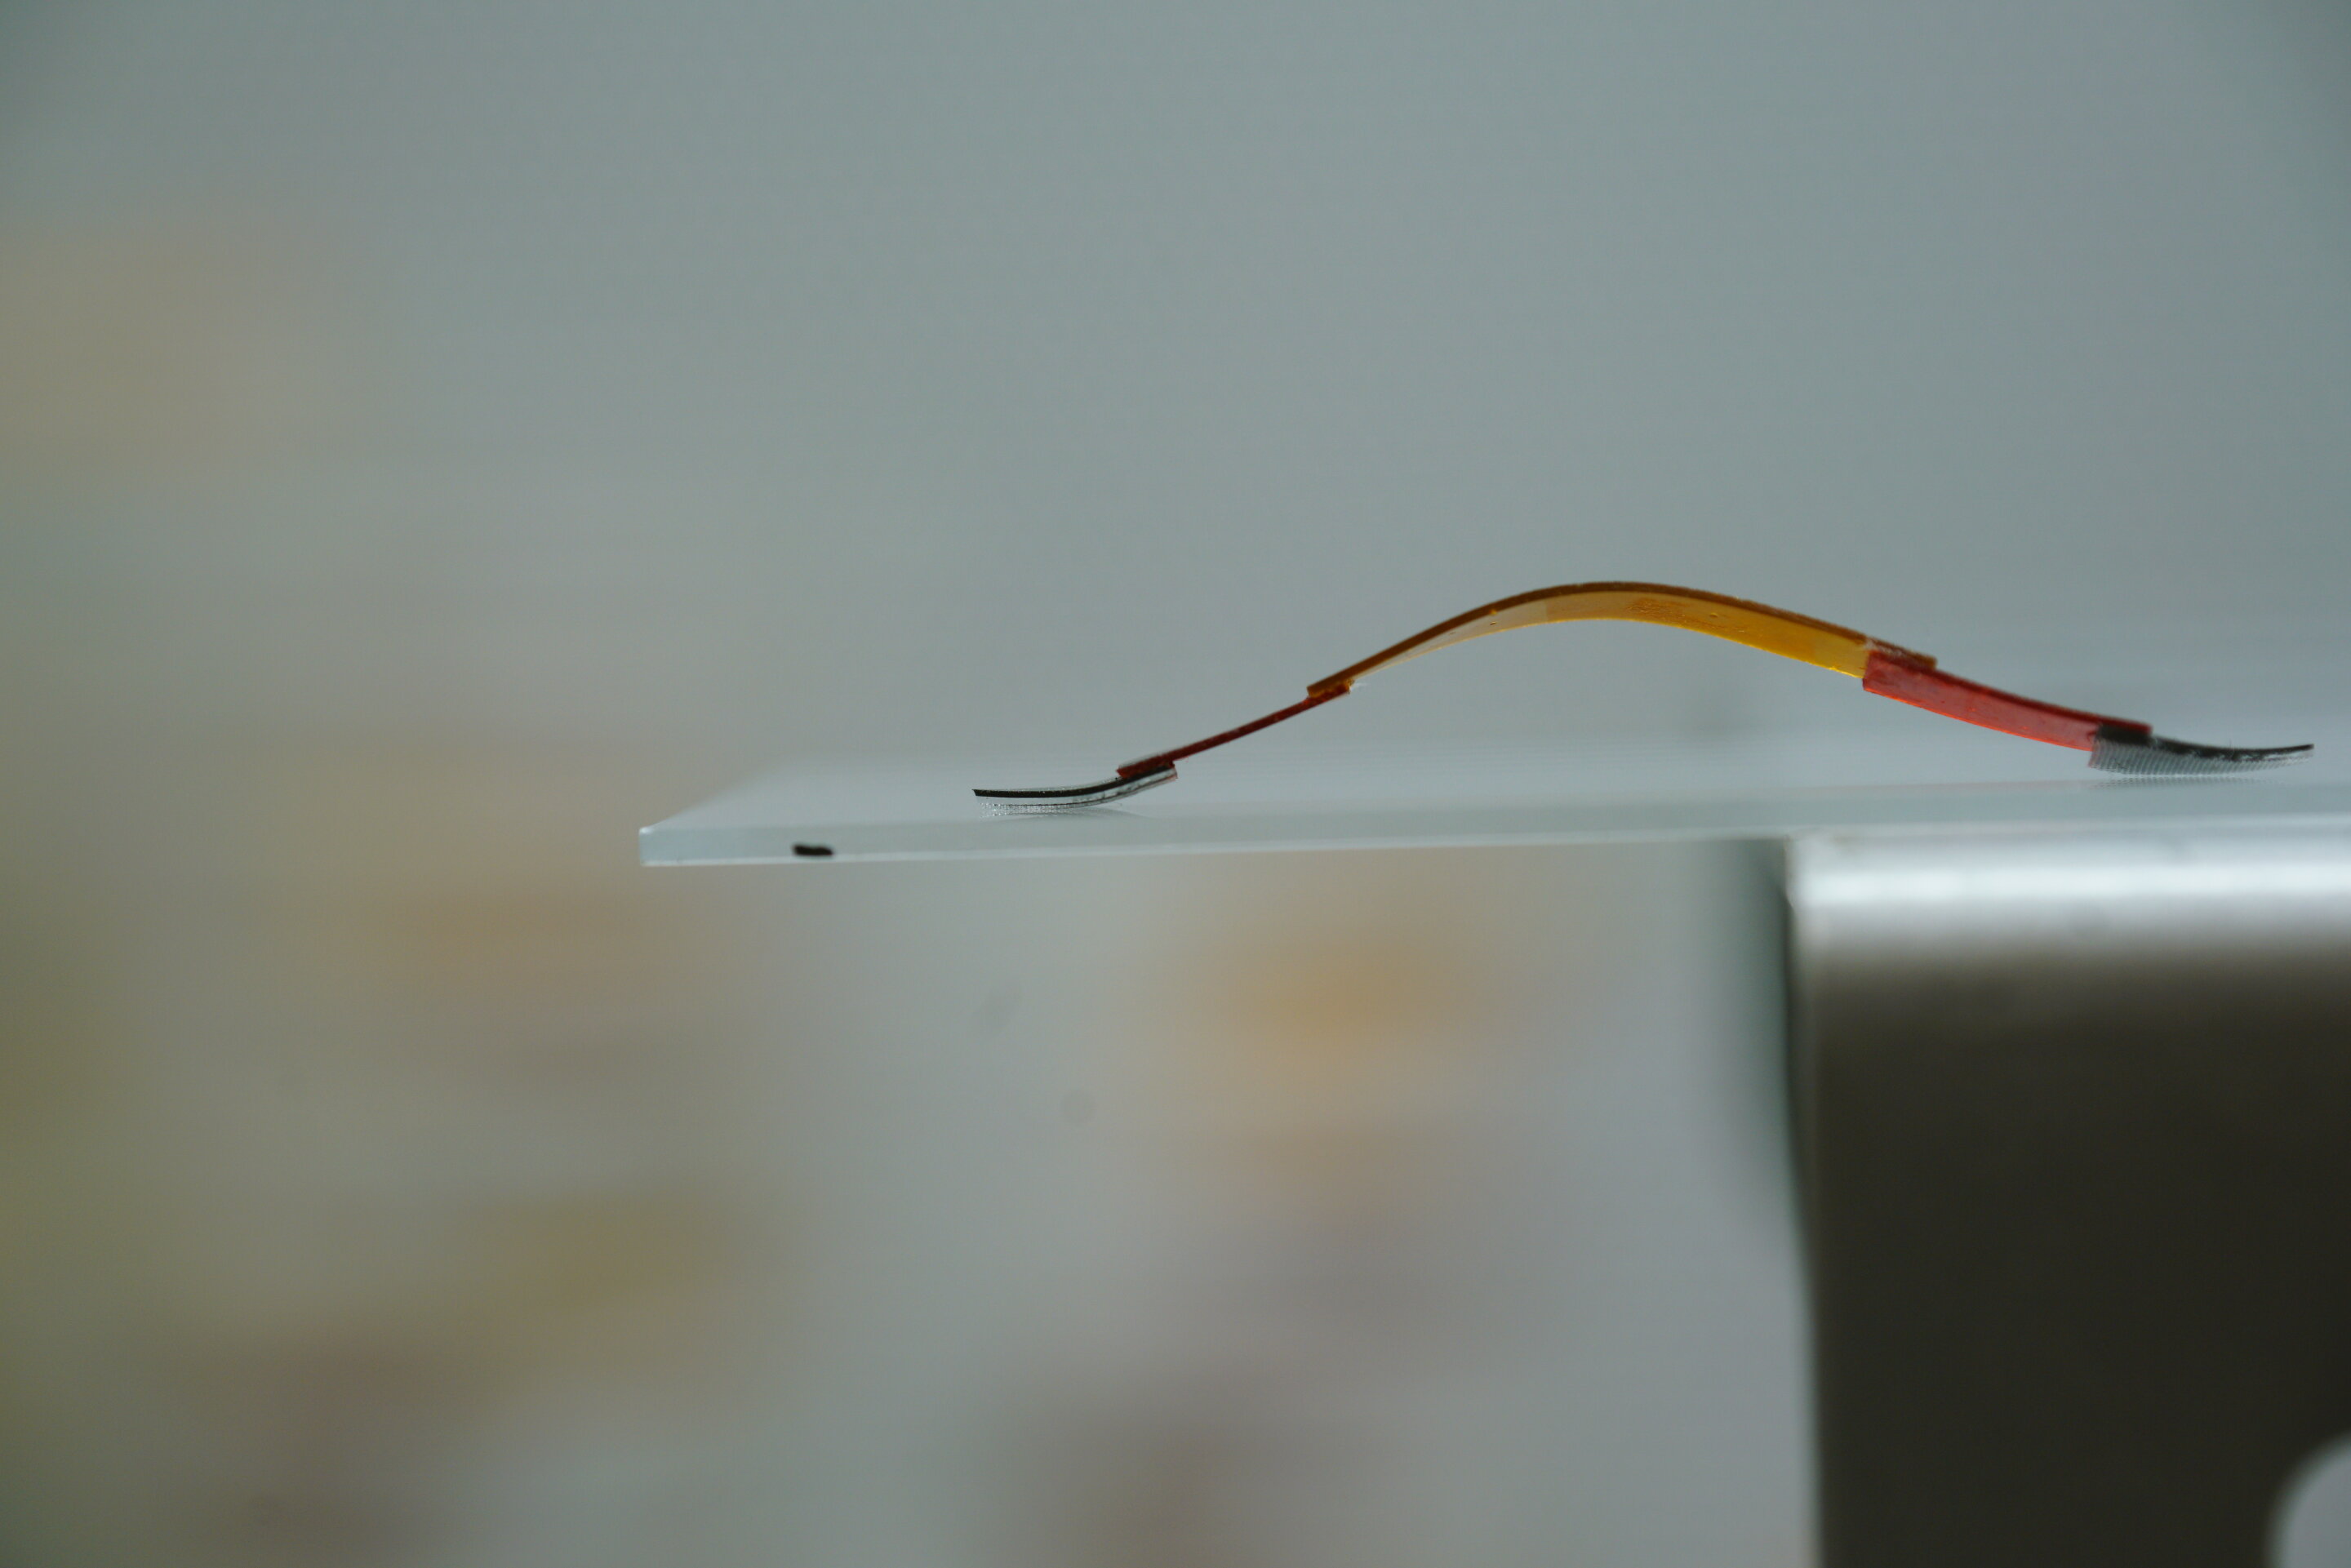 A tiny new climbing robot inspired by geckos and inchworms